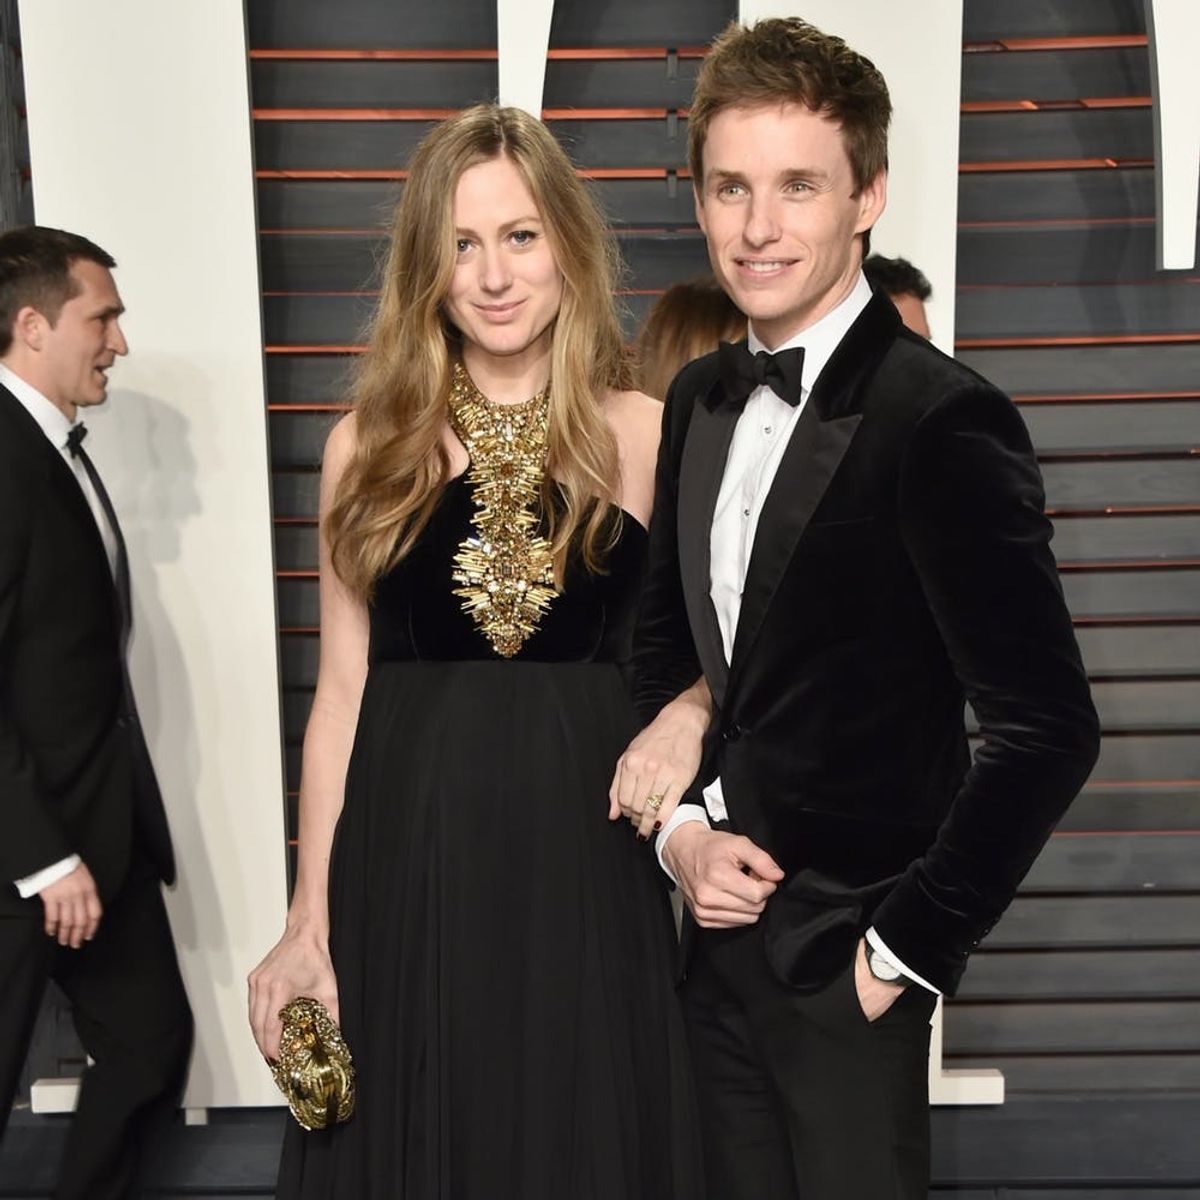 Eddie Redmayne Just Got the Best Father’s Day Gift Ever in the Form of a Newborn Baby and This Is Her Name